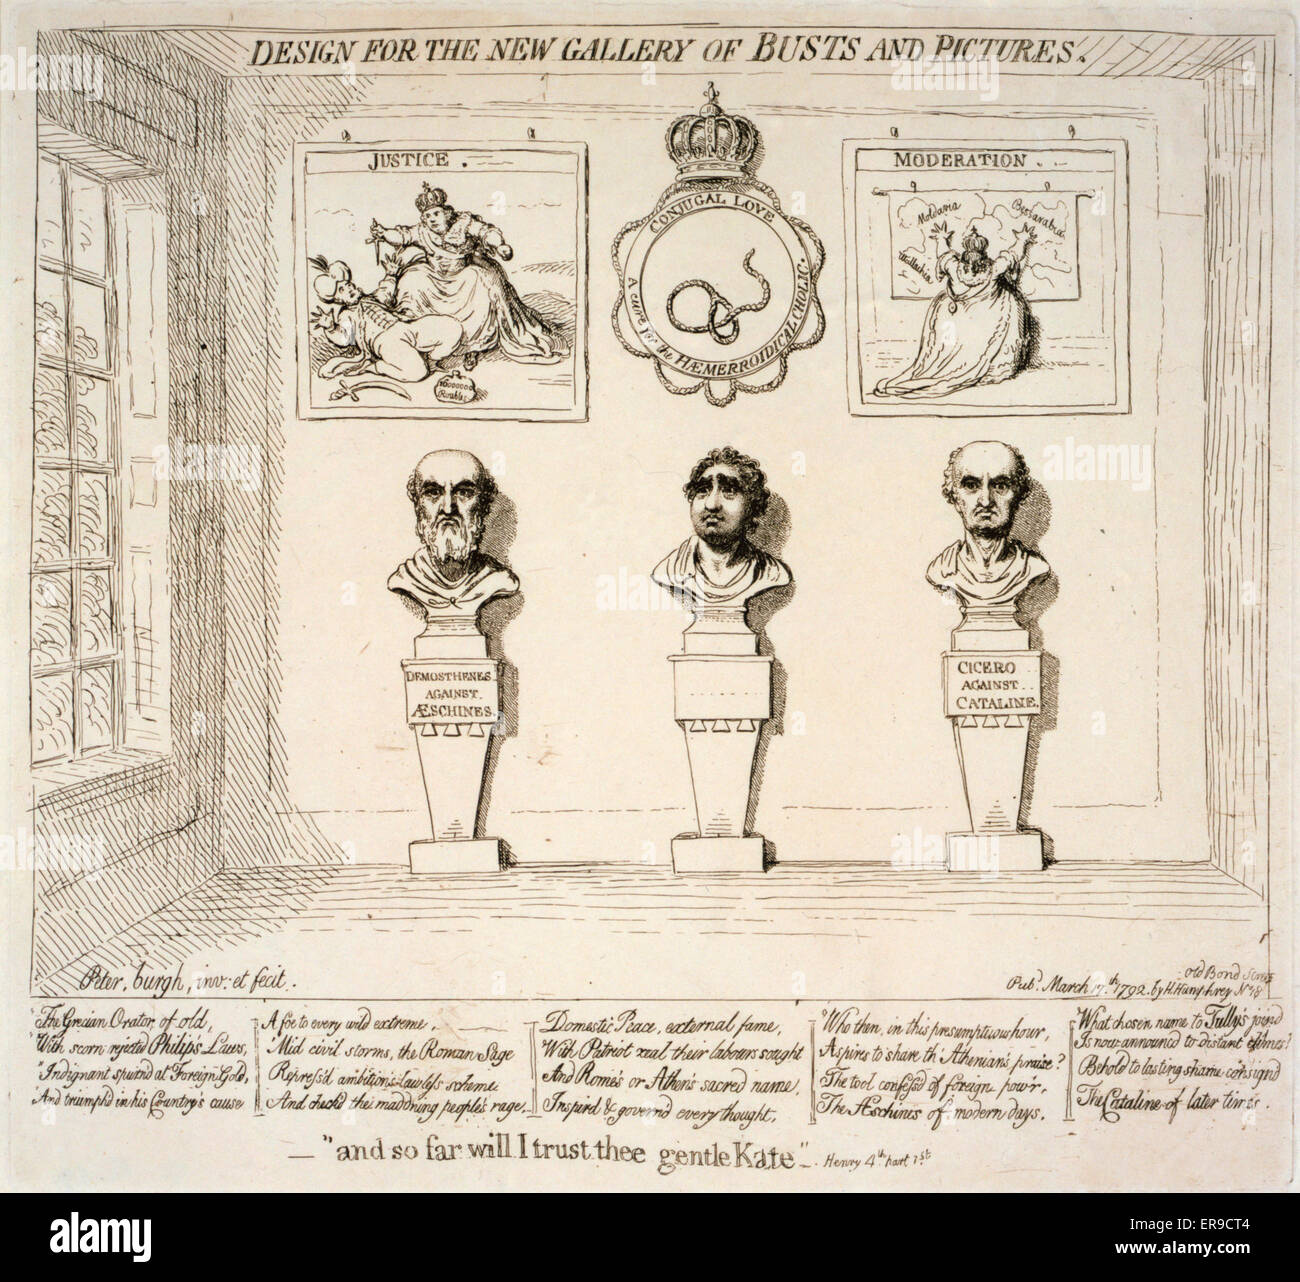 Design for the new gallery of busts and pictures -and so far will I trust thee gentle Kate -Henry 4th, part 1st /. Cartoon shows interior view of a portrait gallery with busts of Demosthenes and Cicero, both frowning, and between them a bust of Charles J. Stock Photo